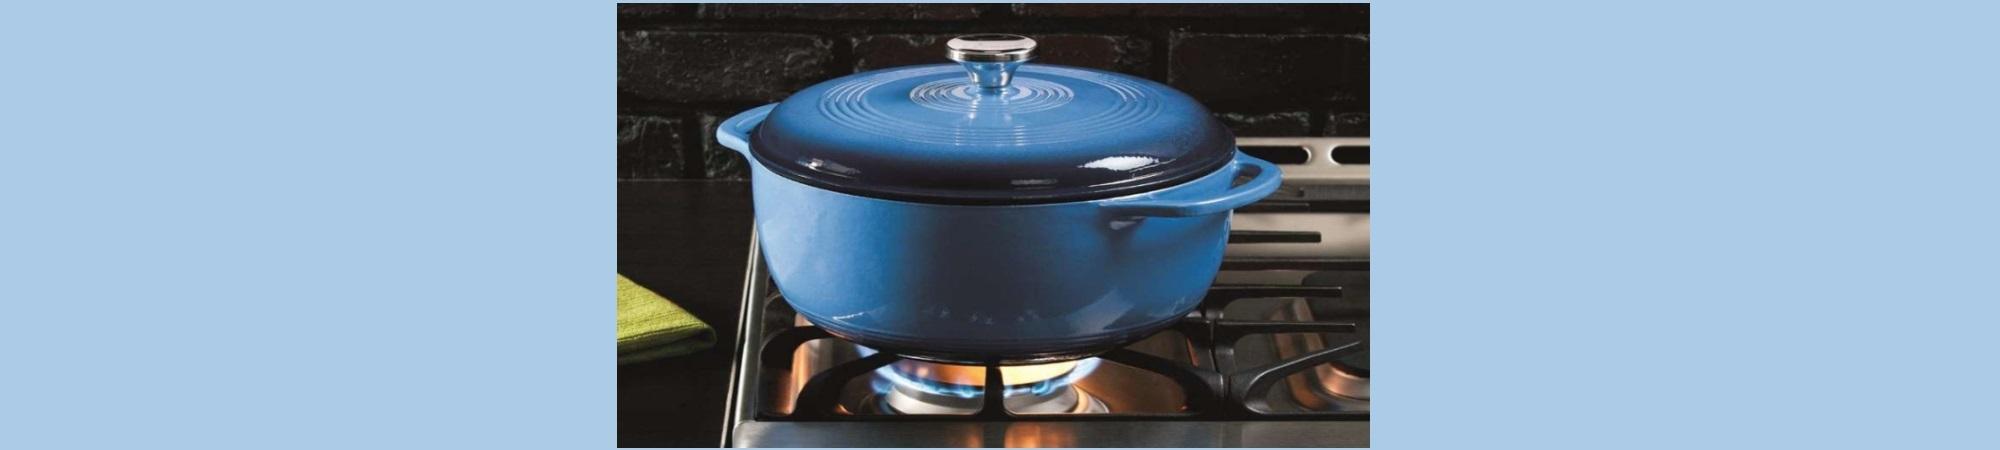 Blue enameled pot on gas stove, heating up. 